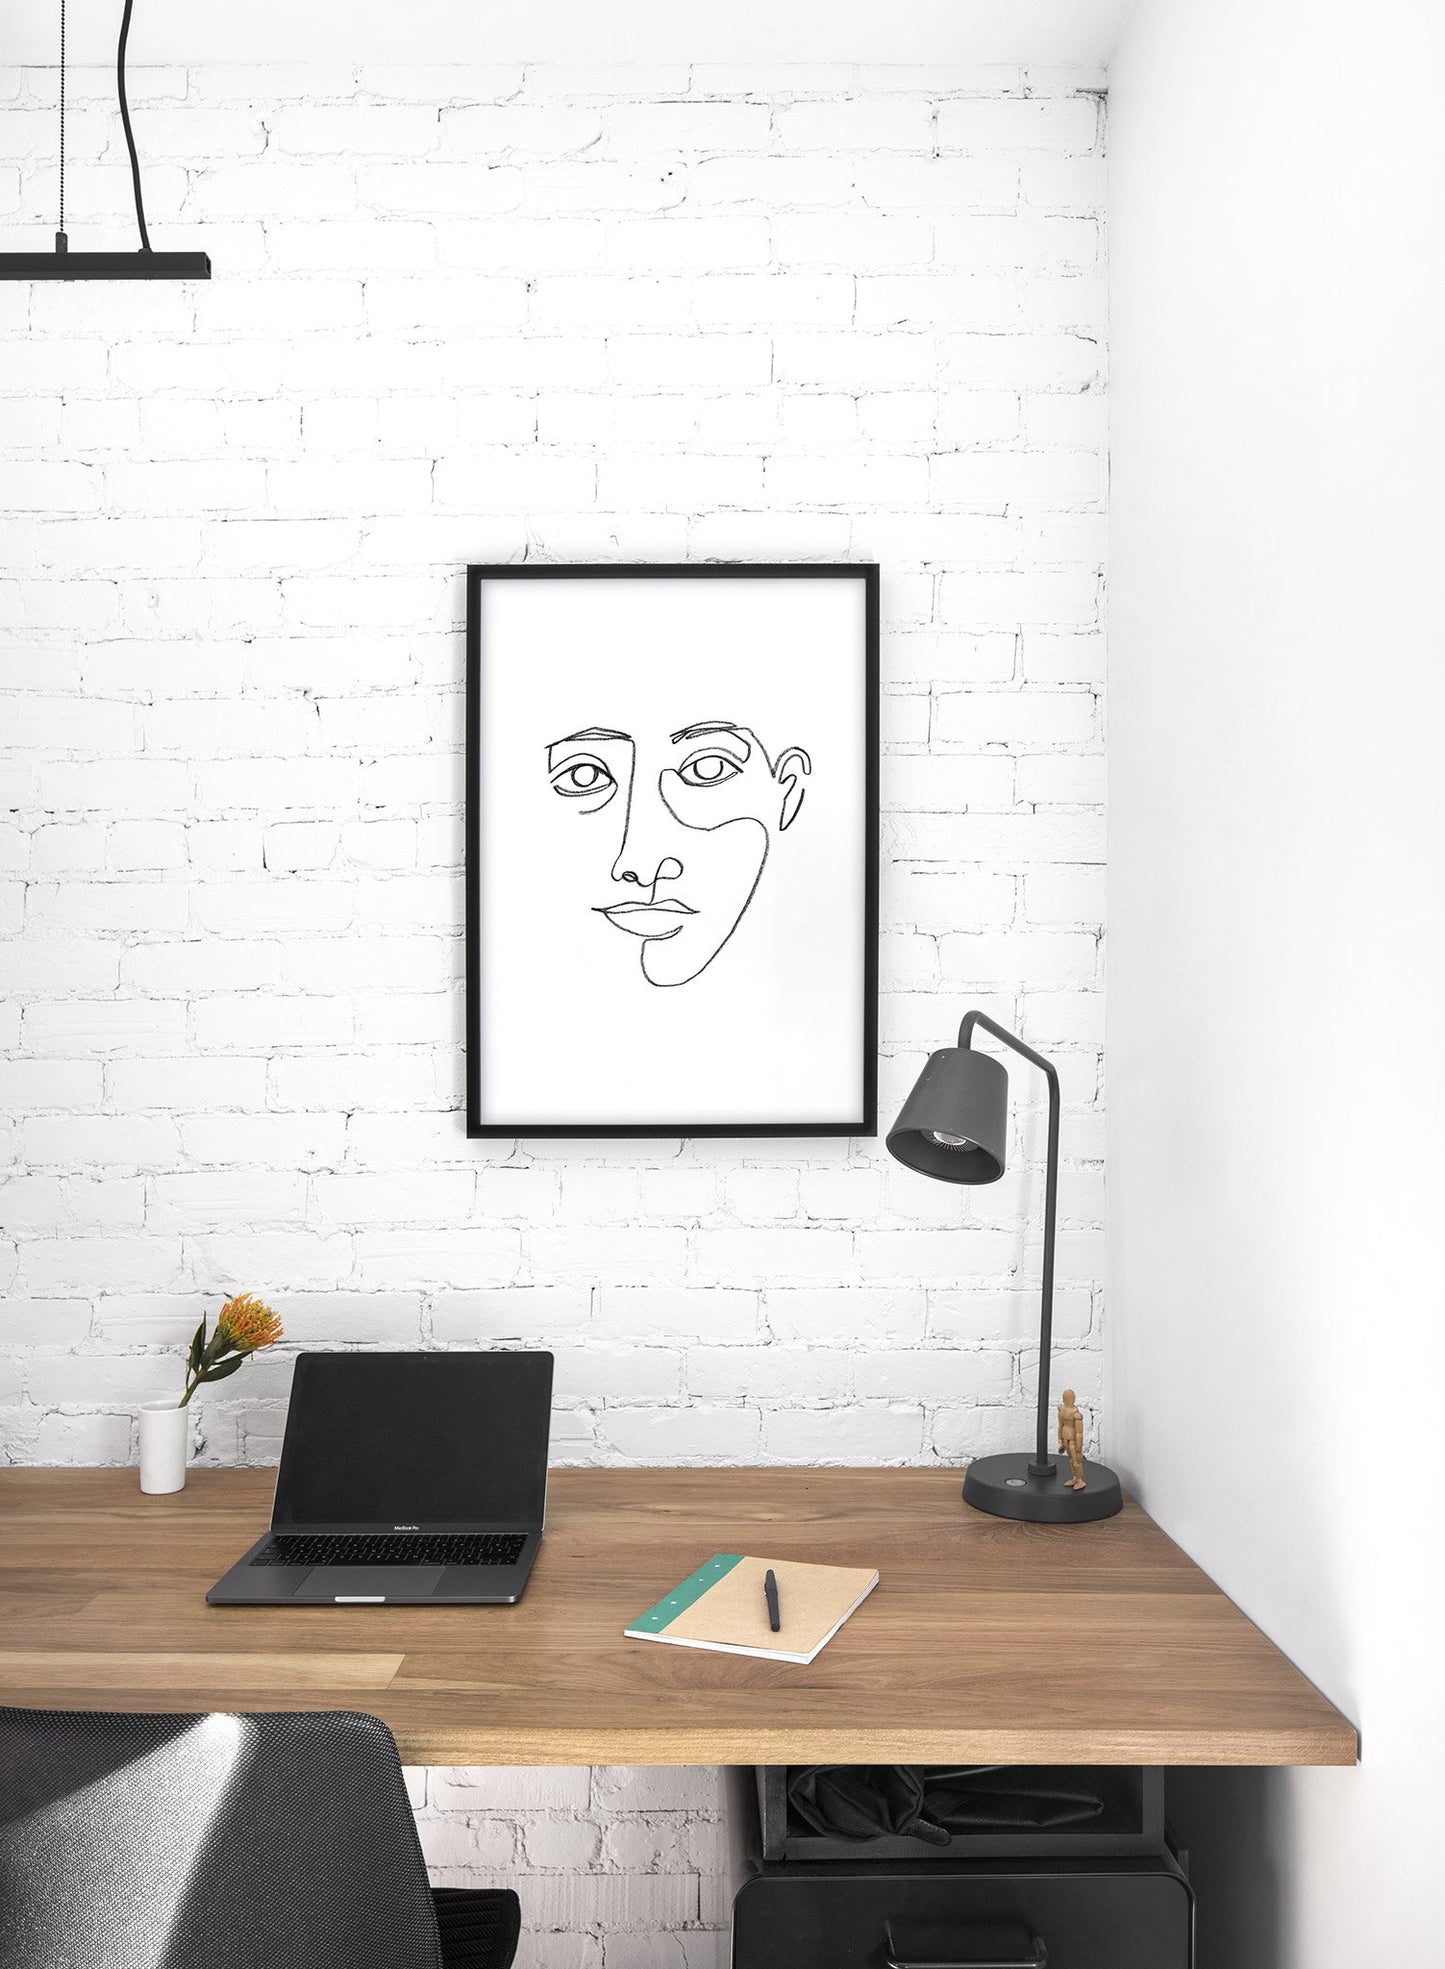 Modern minimalist abstract line art poster by Opposite Wall - Soulful Gaze - Lifestyle - Office Desk